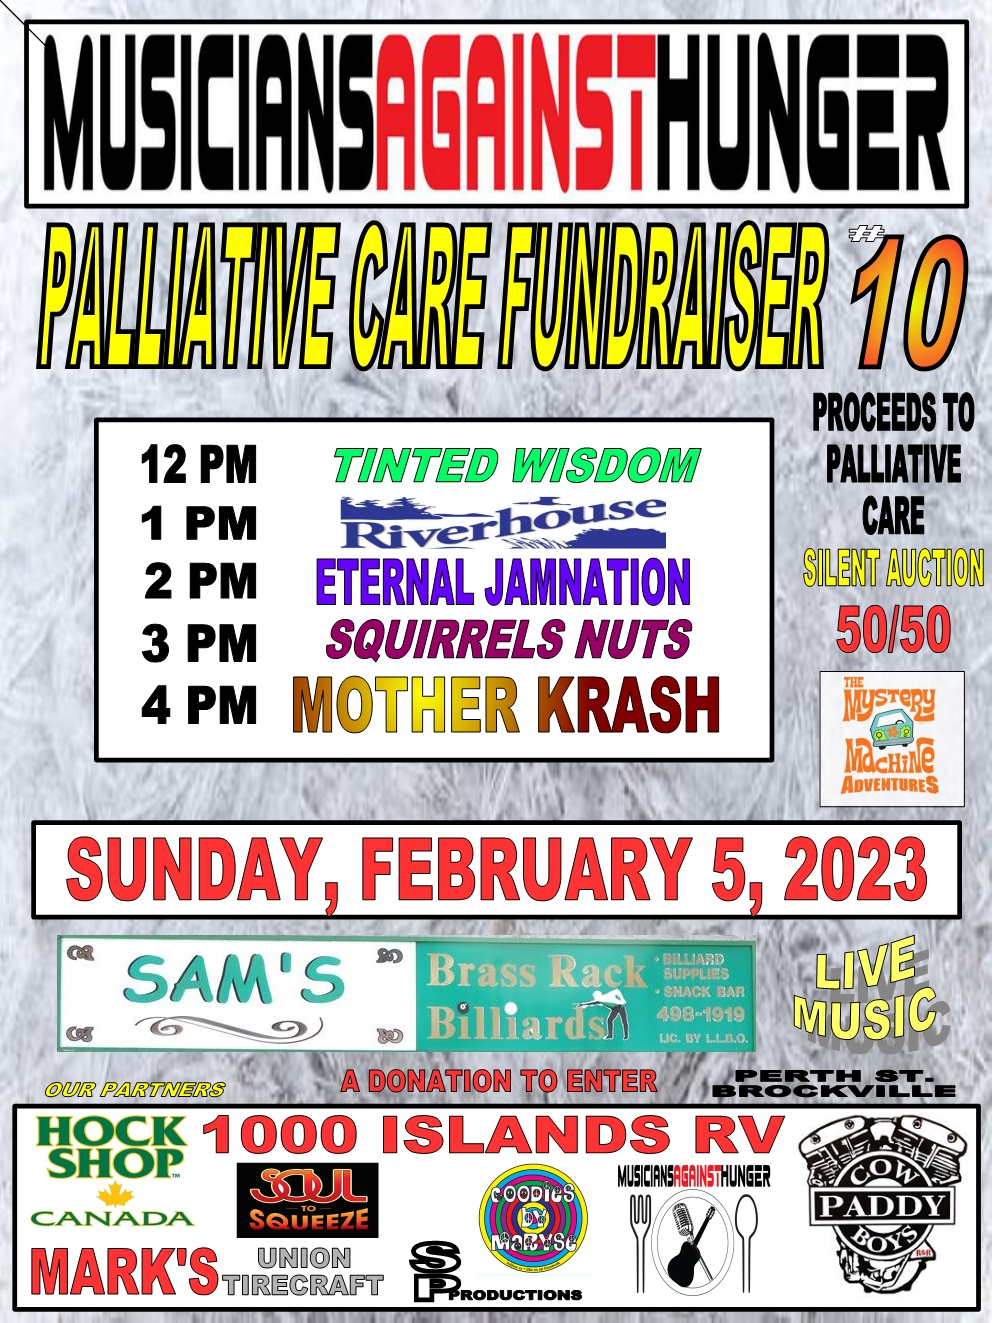 Musicians against Hunger have a fundraiser for Palliative Care this Sunday at Sam's Brass Racks